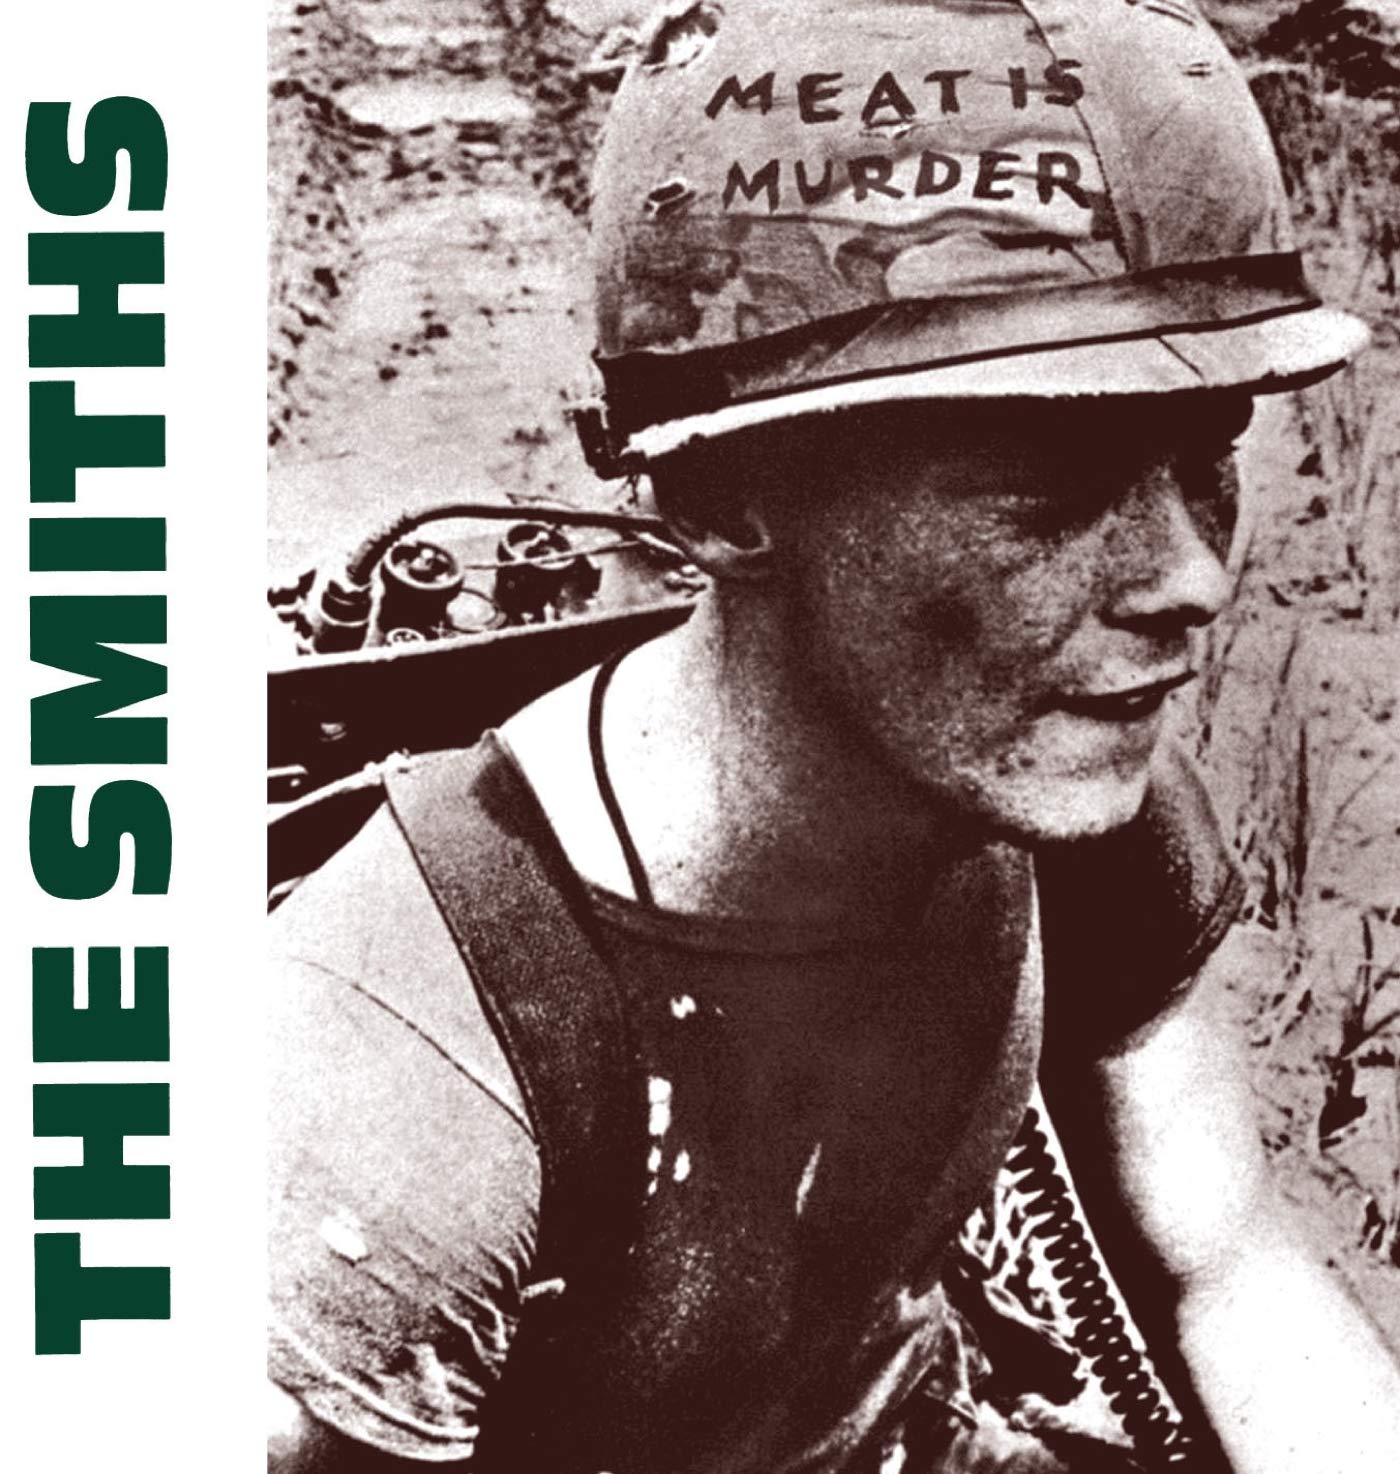 The Smiths "Meat is murder" LP